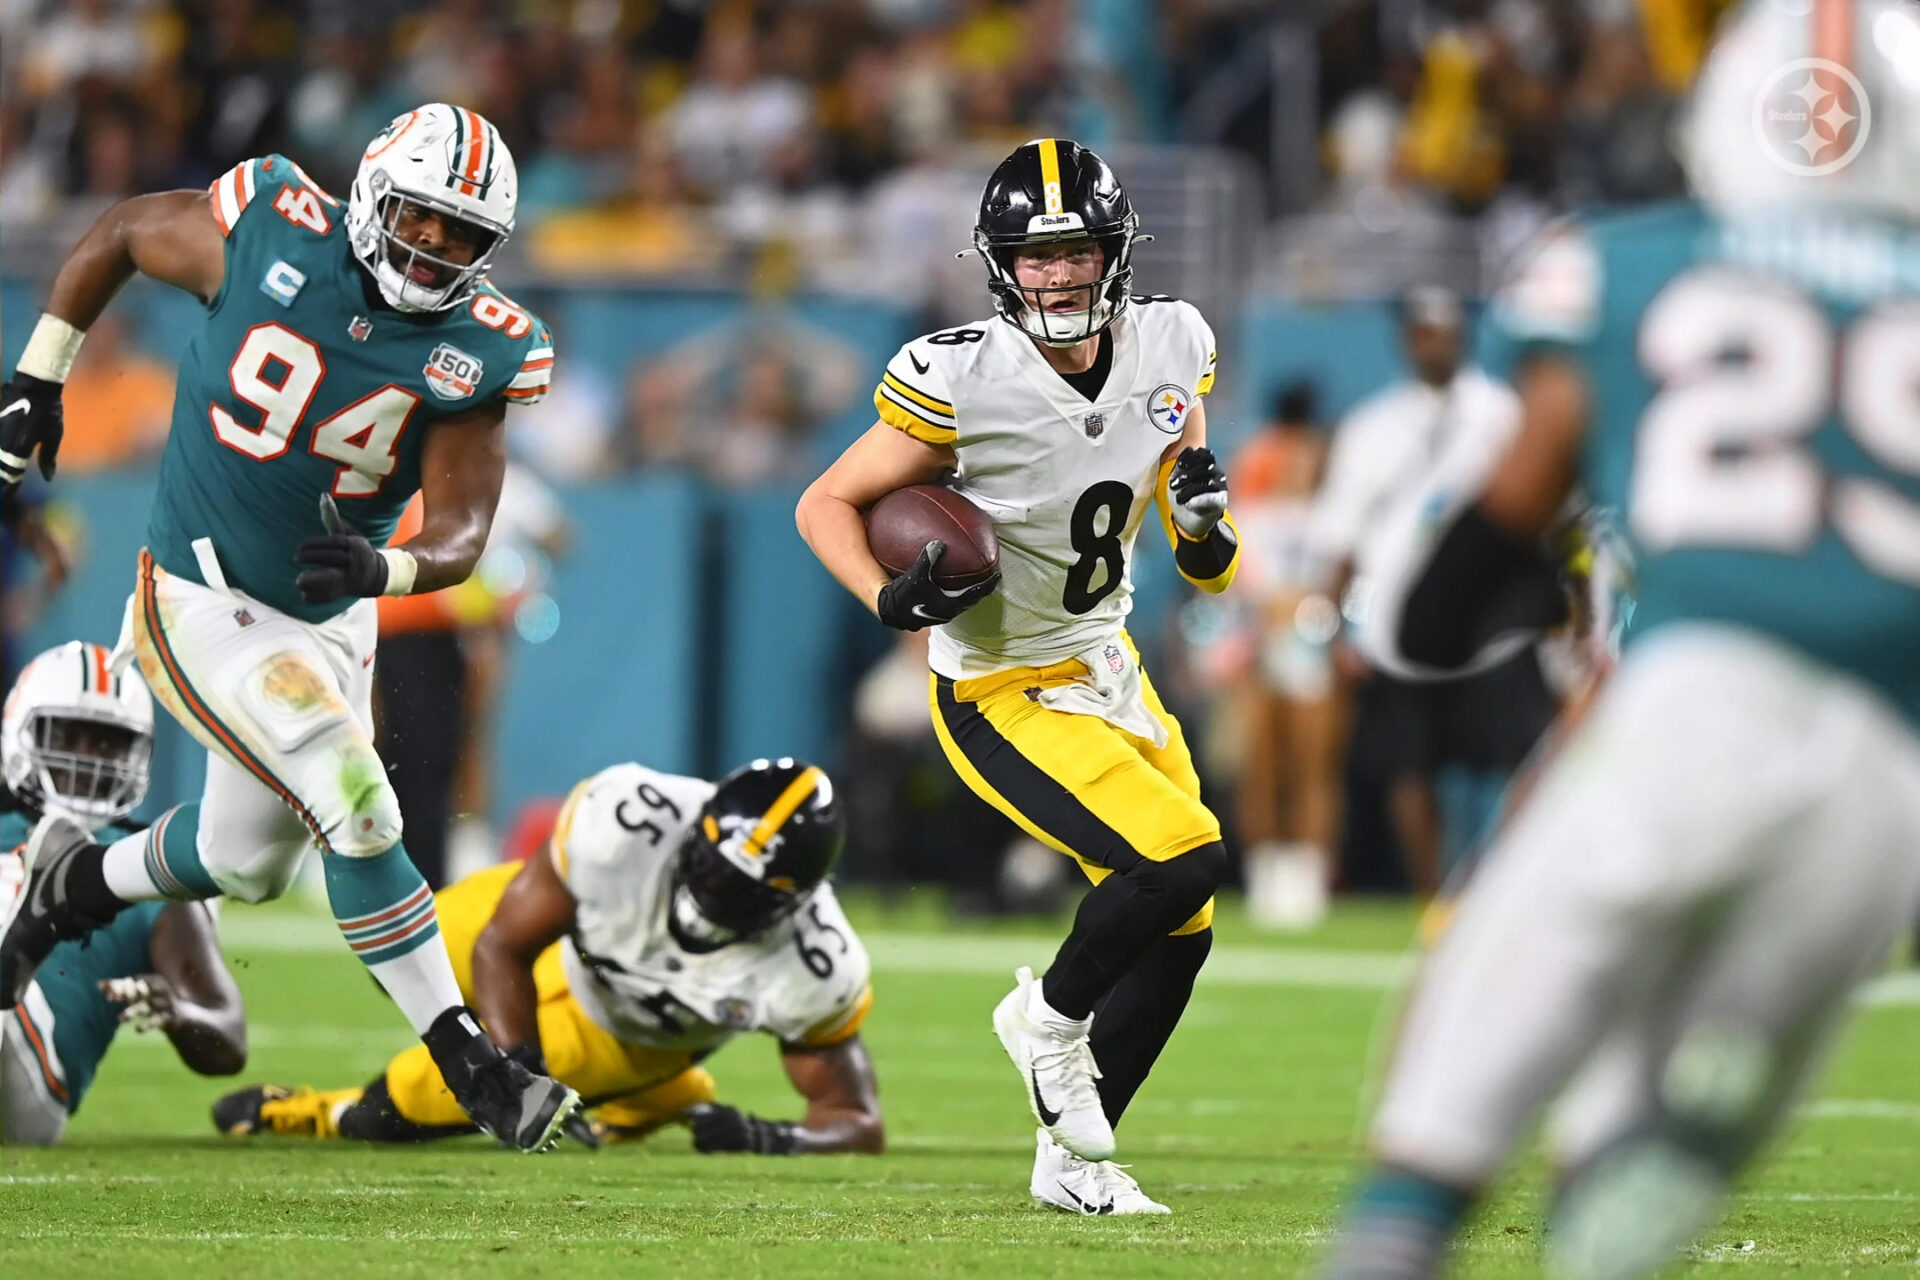 Miami Dolphins schedule 2022: Packers, Steelers coming to Hard Rock Stadium